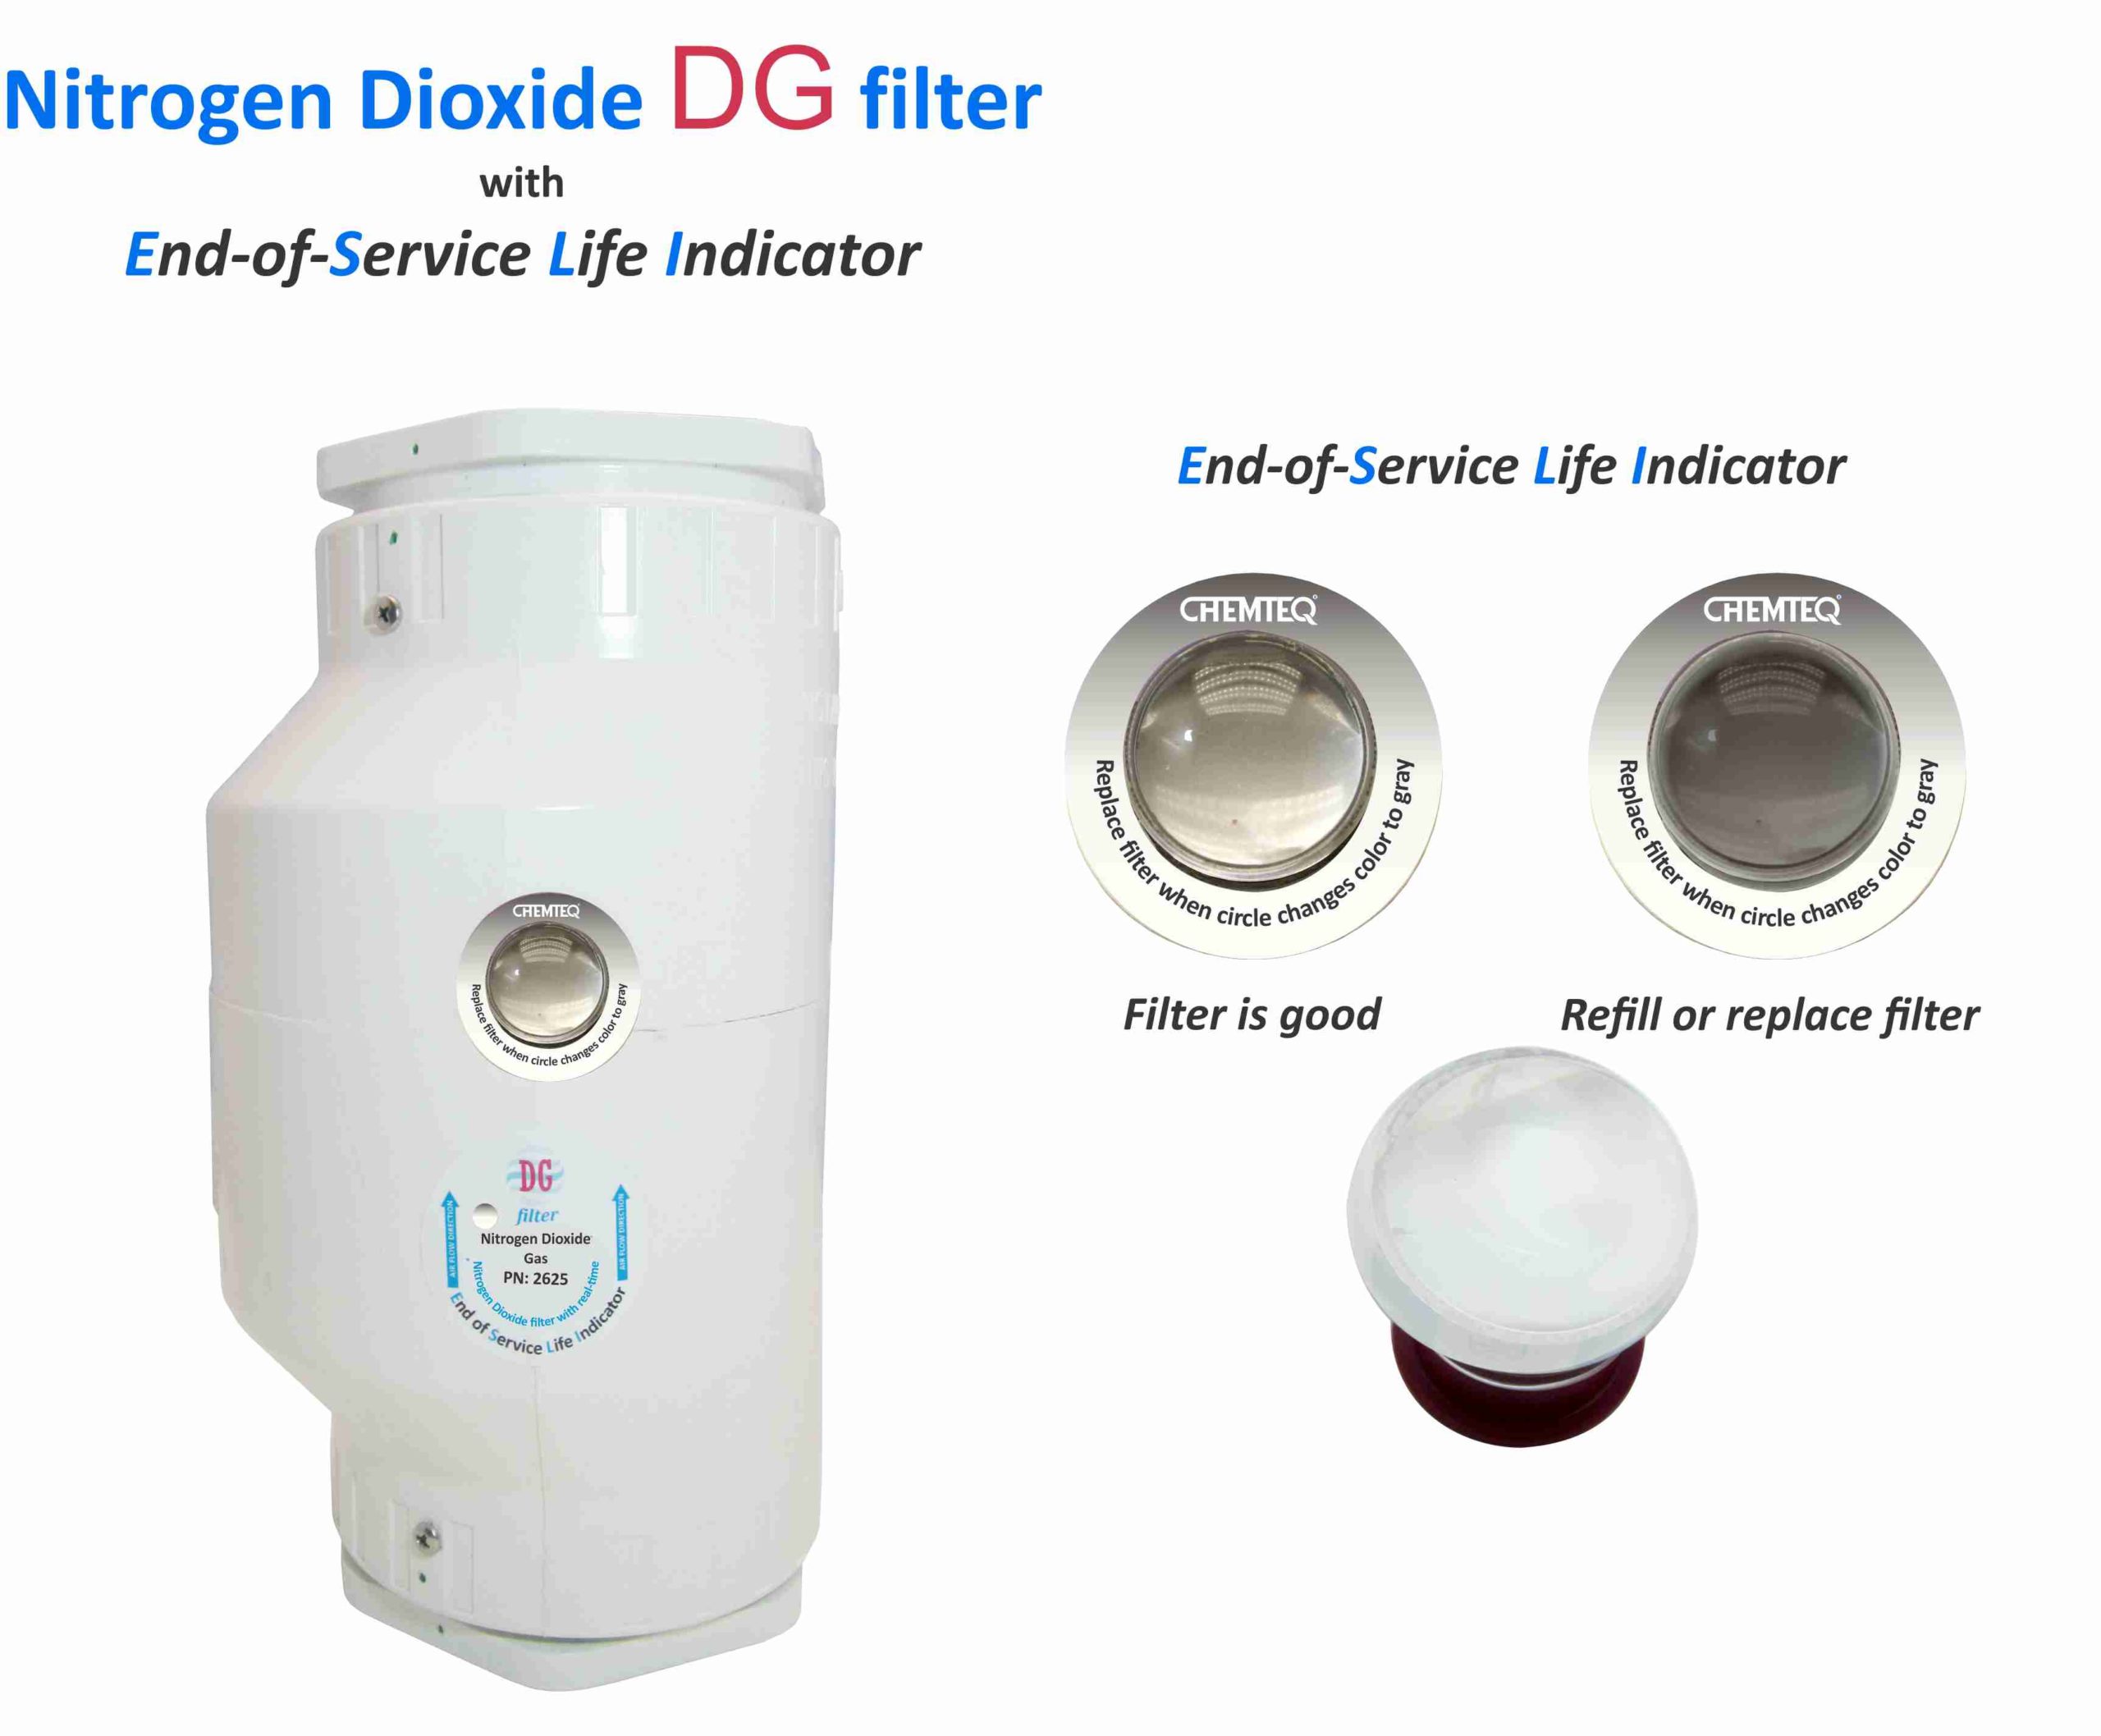 Nitrogen Dioxide DG FILTER-ESLI-2625. Filter with end of service life indicator for chemical processes and reactor vents.